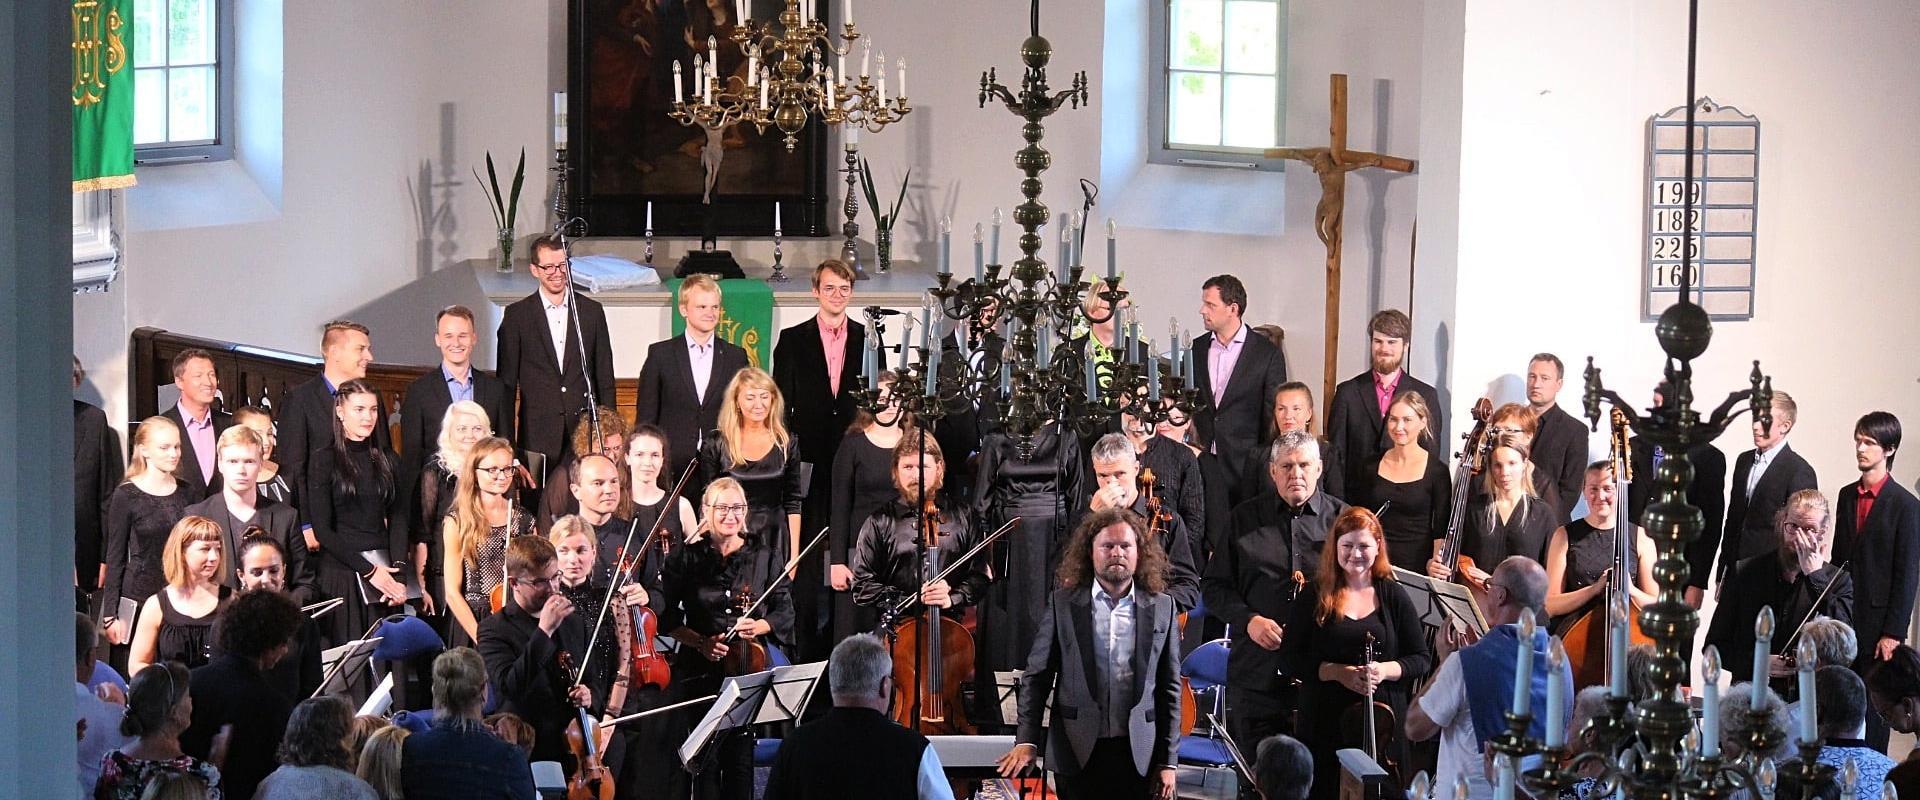 Pühalepa Music Festival, which takes place on Hiiumaa, focuses on the works of both old-school and contemporary composers. During three days, the fest